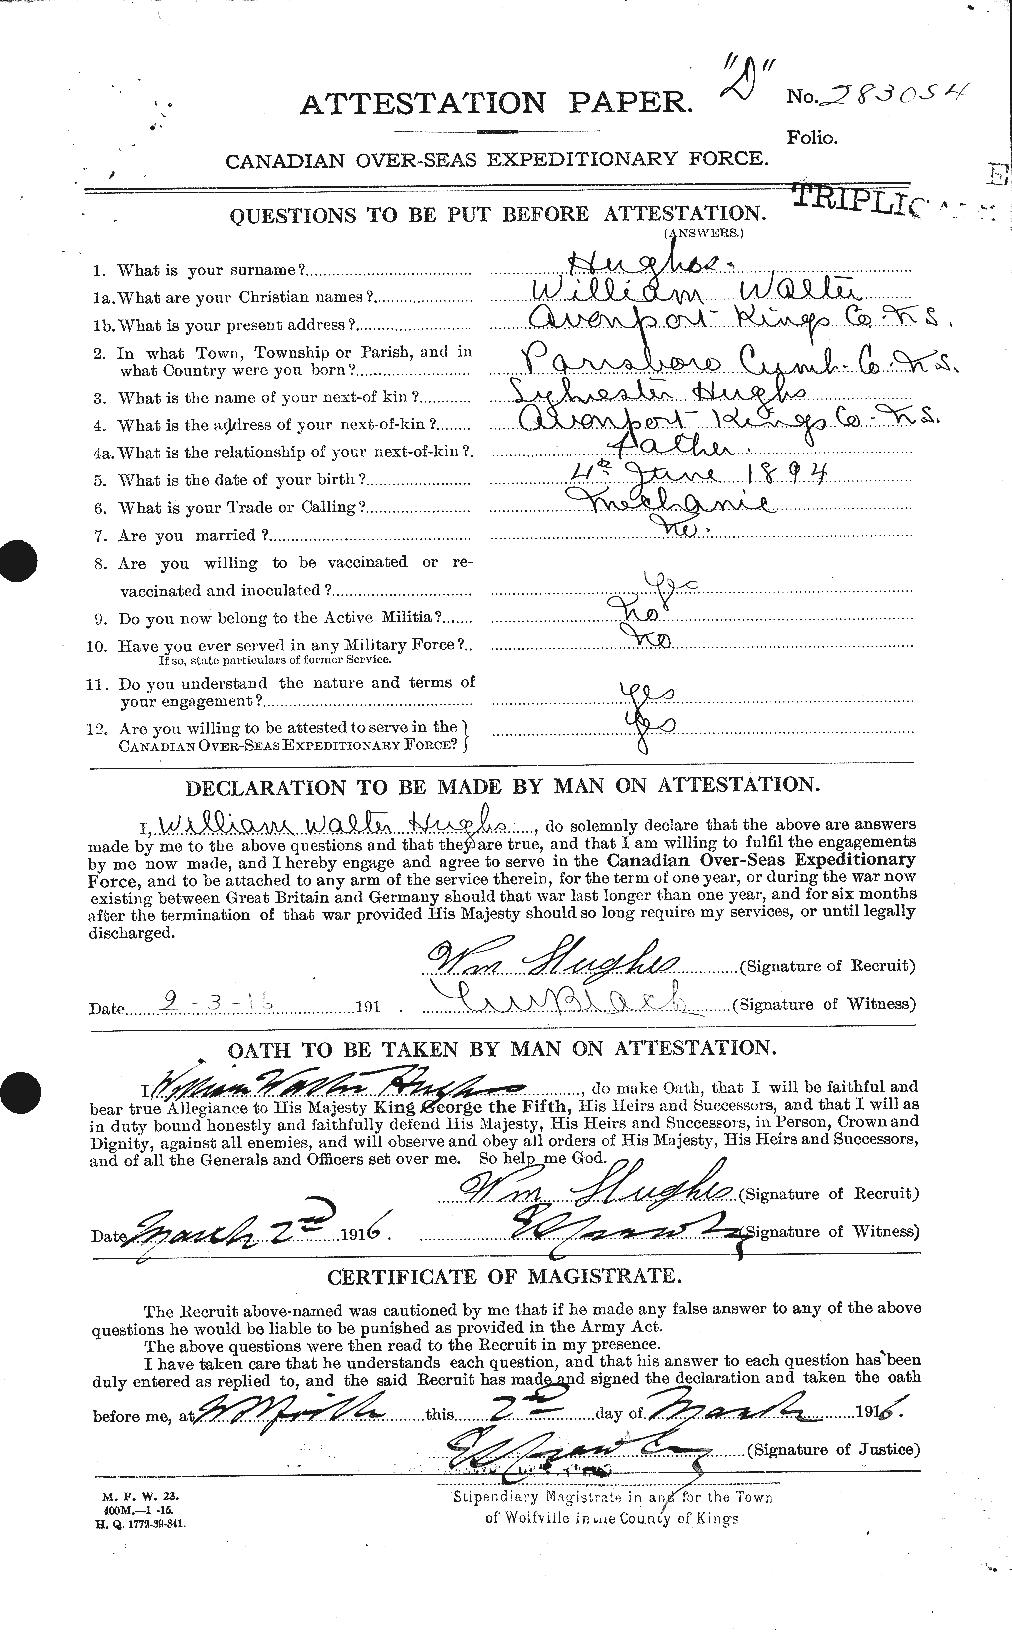 Personnel Records of the First World War - CEF 405964a